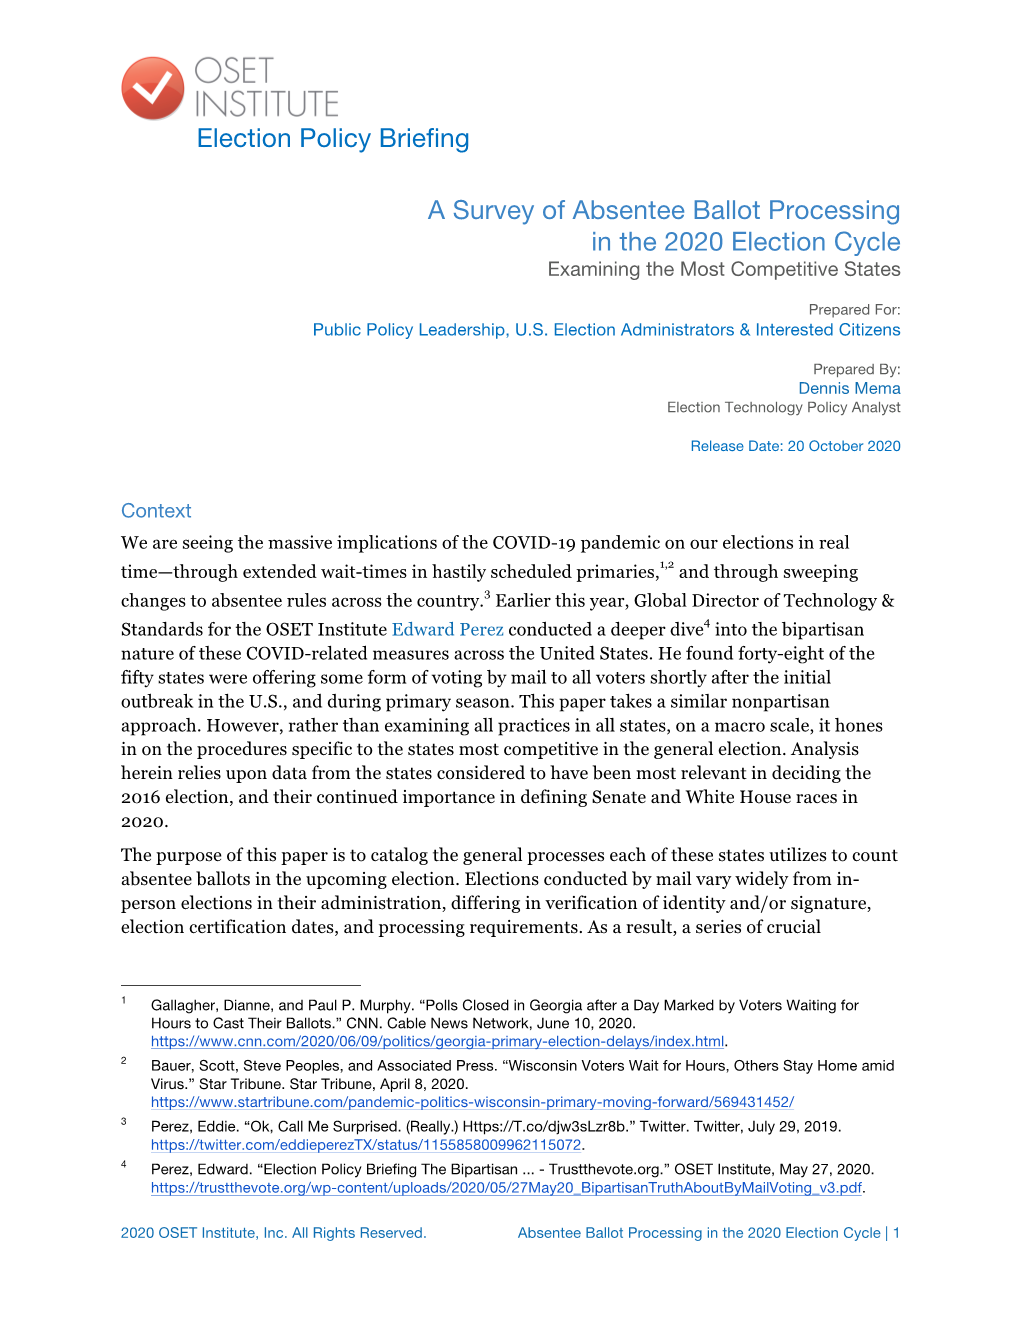 A Survey of Absentee Ballot Processing in the 2020 Election Cycle Examining the Most Competitive States